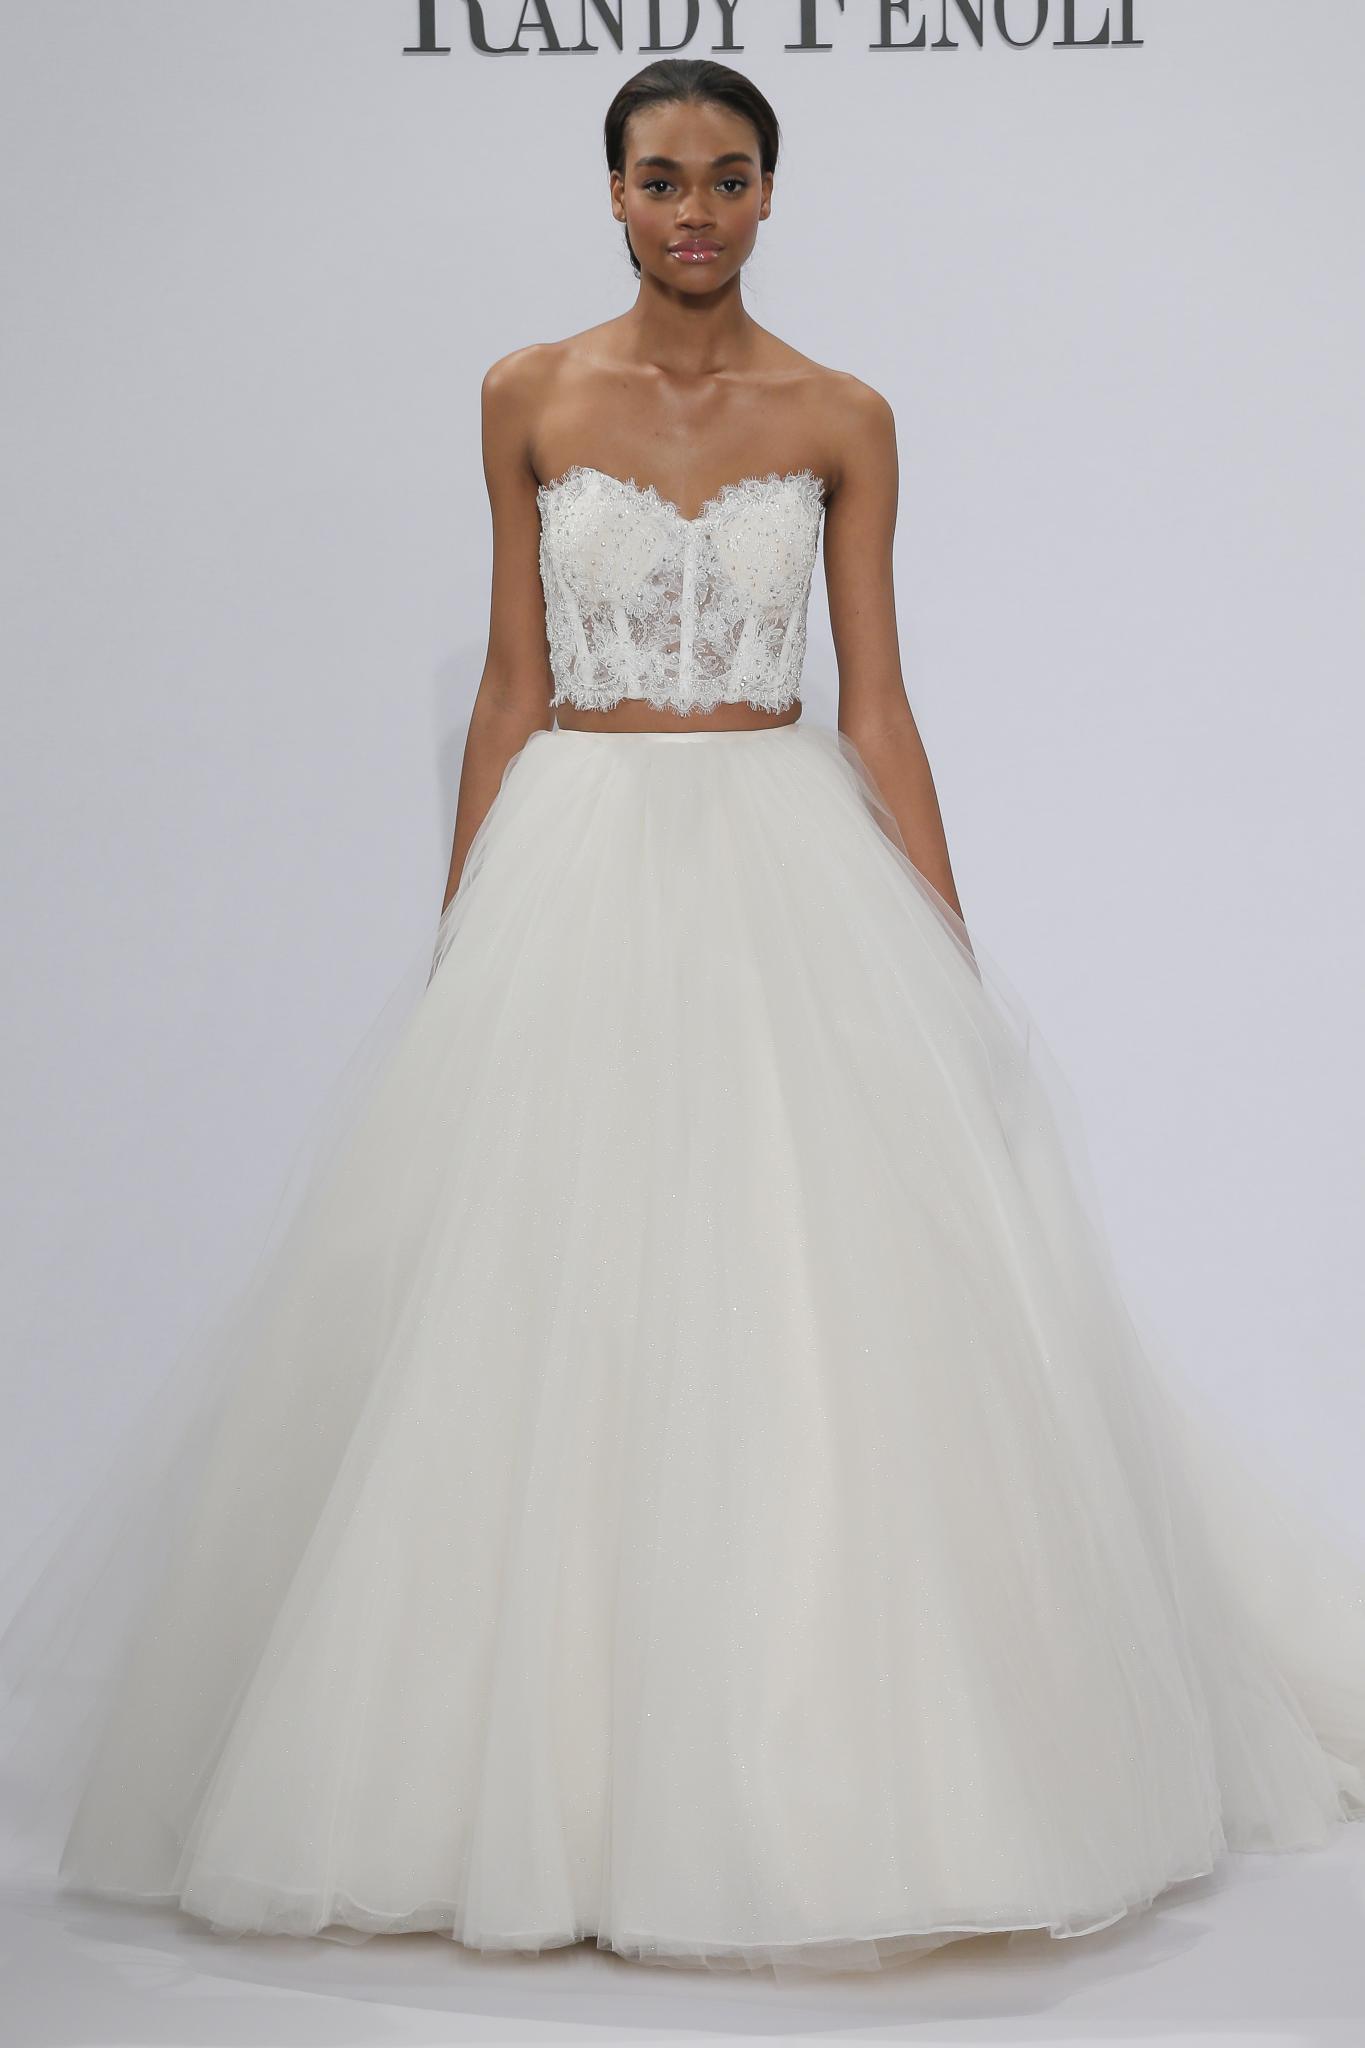  Randy  Fenoli  S S 2019 Bridal  Collection ChicagoStyle 